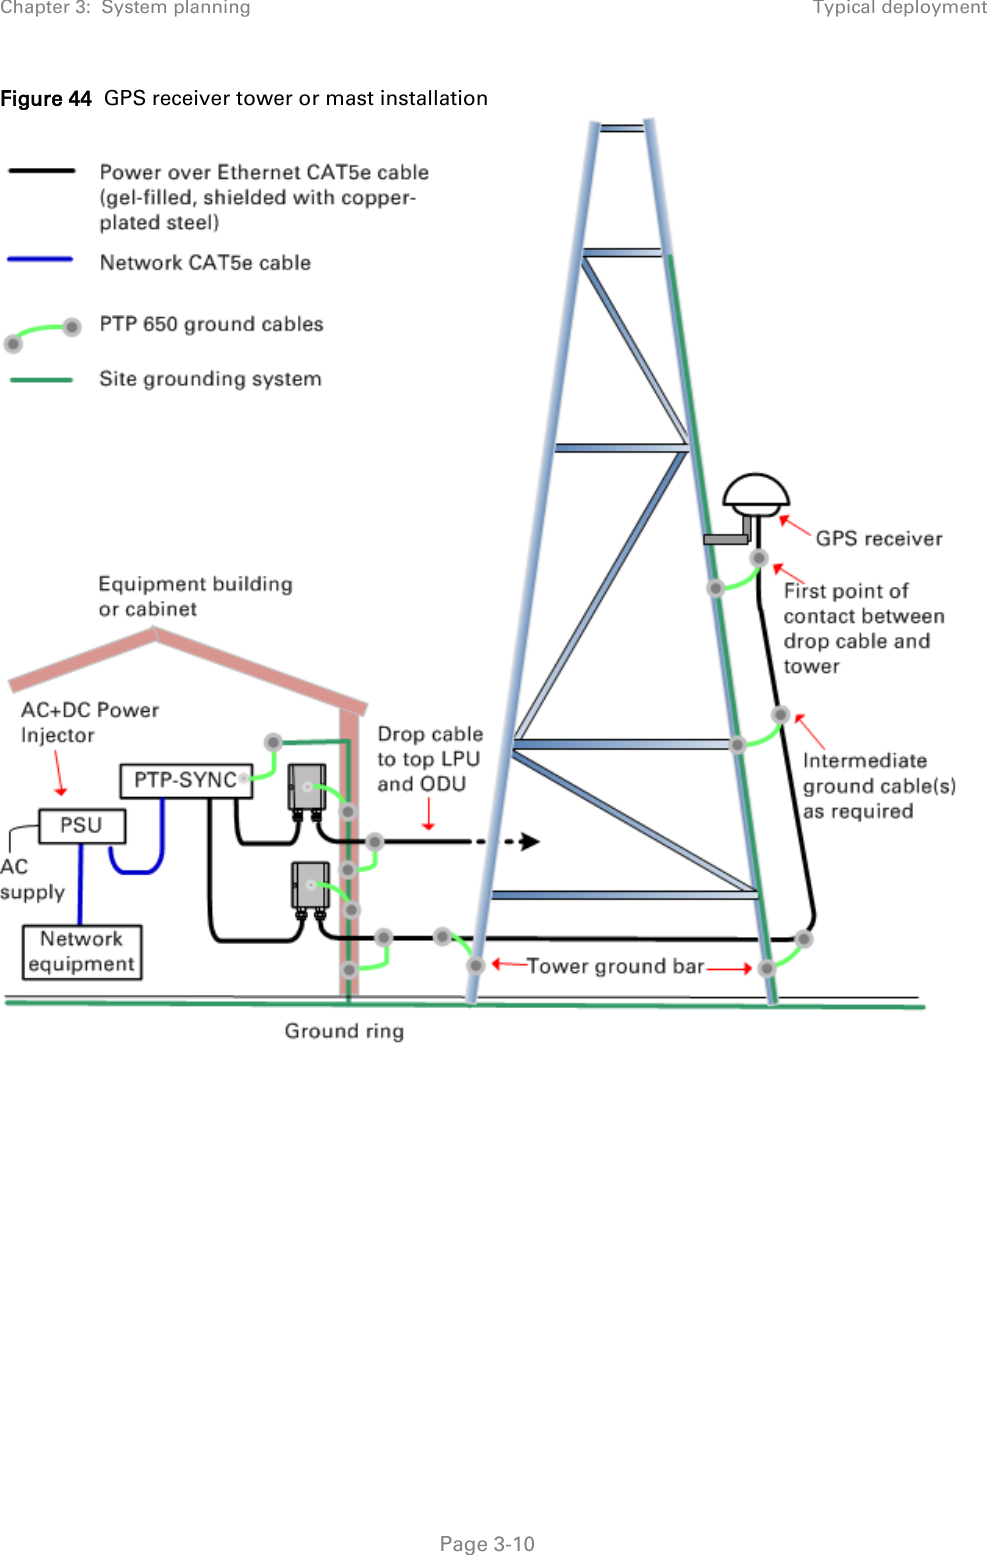 Chapter 3:  System planning Typical deployment  Figure 44  GPS receiver tower or mast installation     Page 3-10 